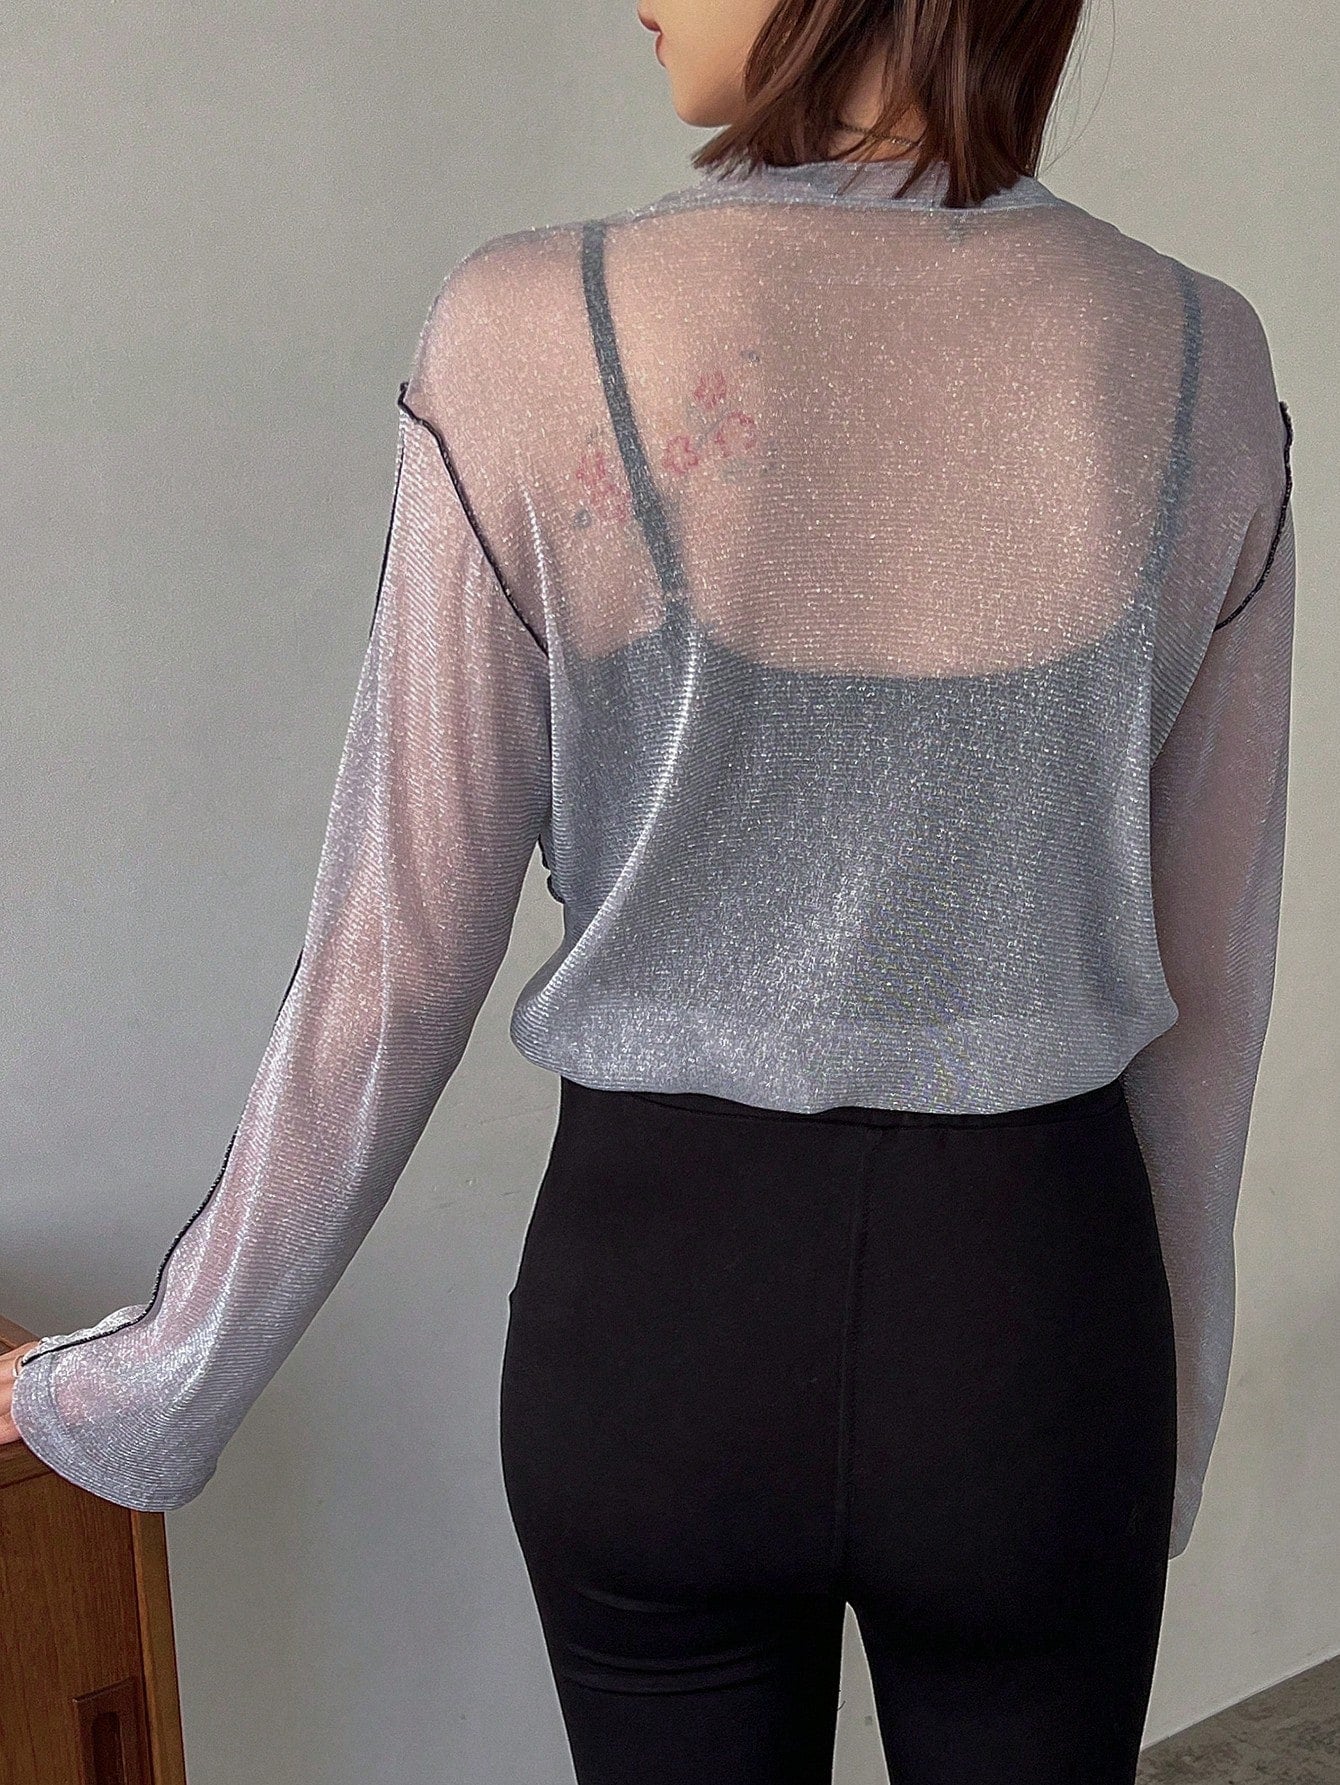 1pc Contrast Stitching Edges Detail Glitter Sheer Top